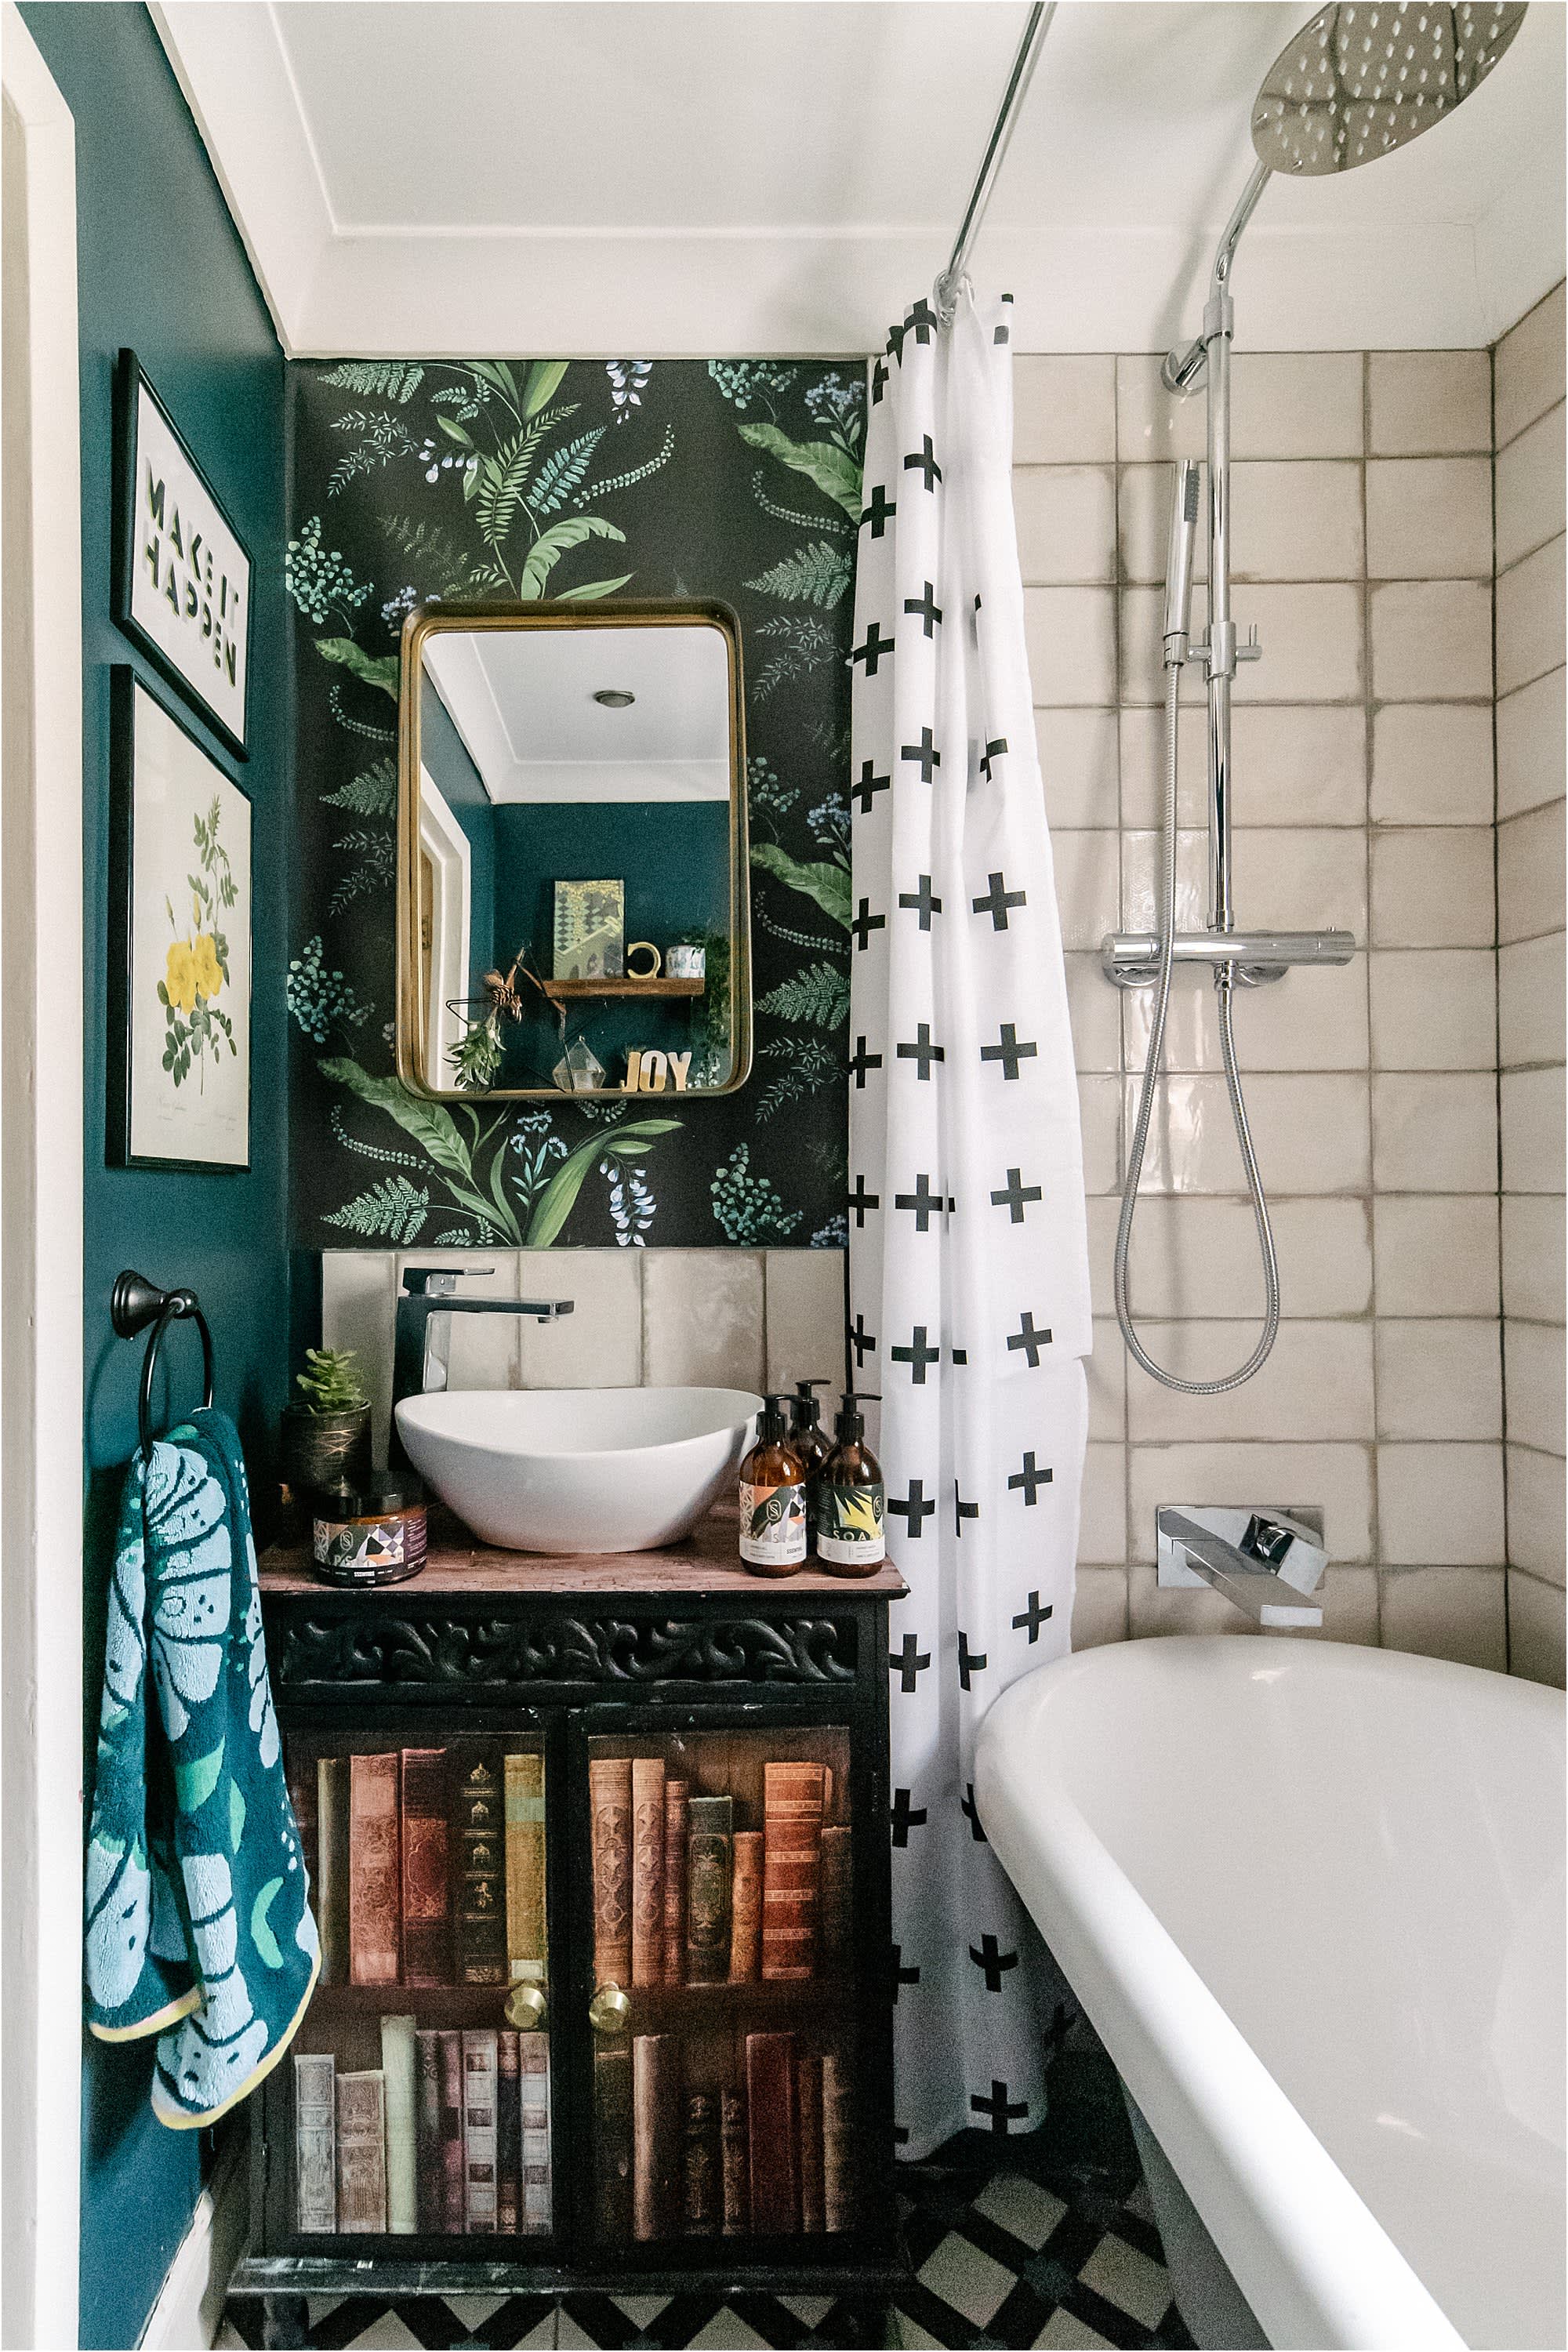 27 Bathroom Color Ideas to Inspire Your Next DIY Project | Architectural  Digest